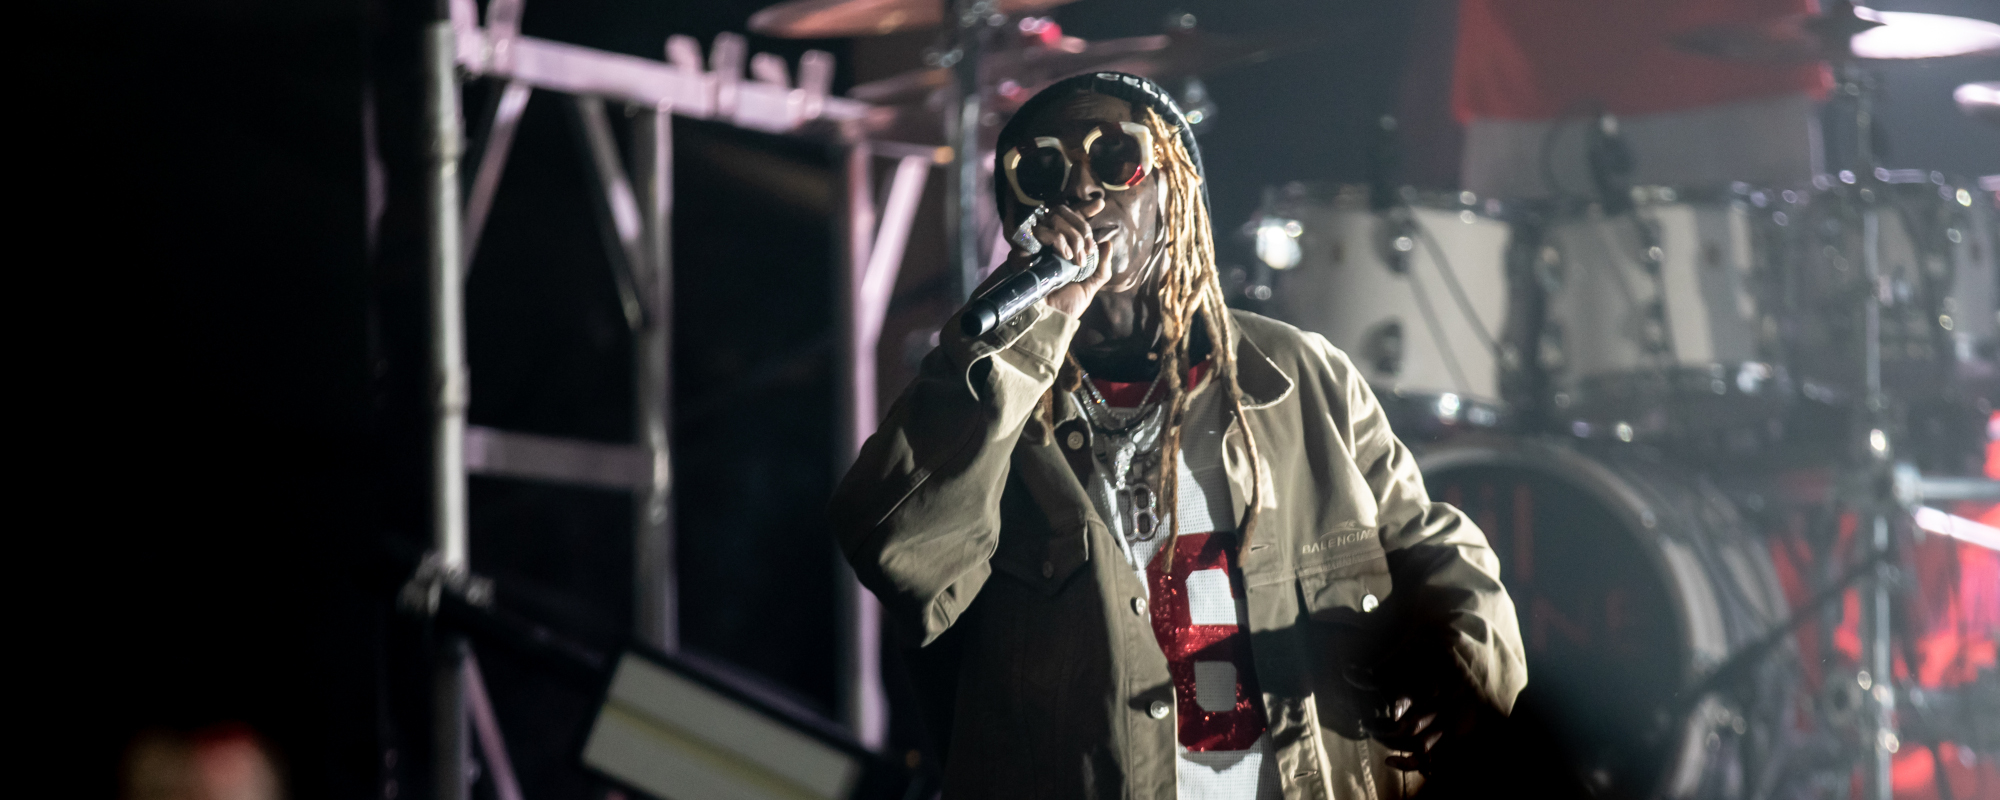 Lil Wayne Gives Special Performance of “A Milli” at ESPN Award Show